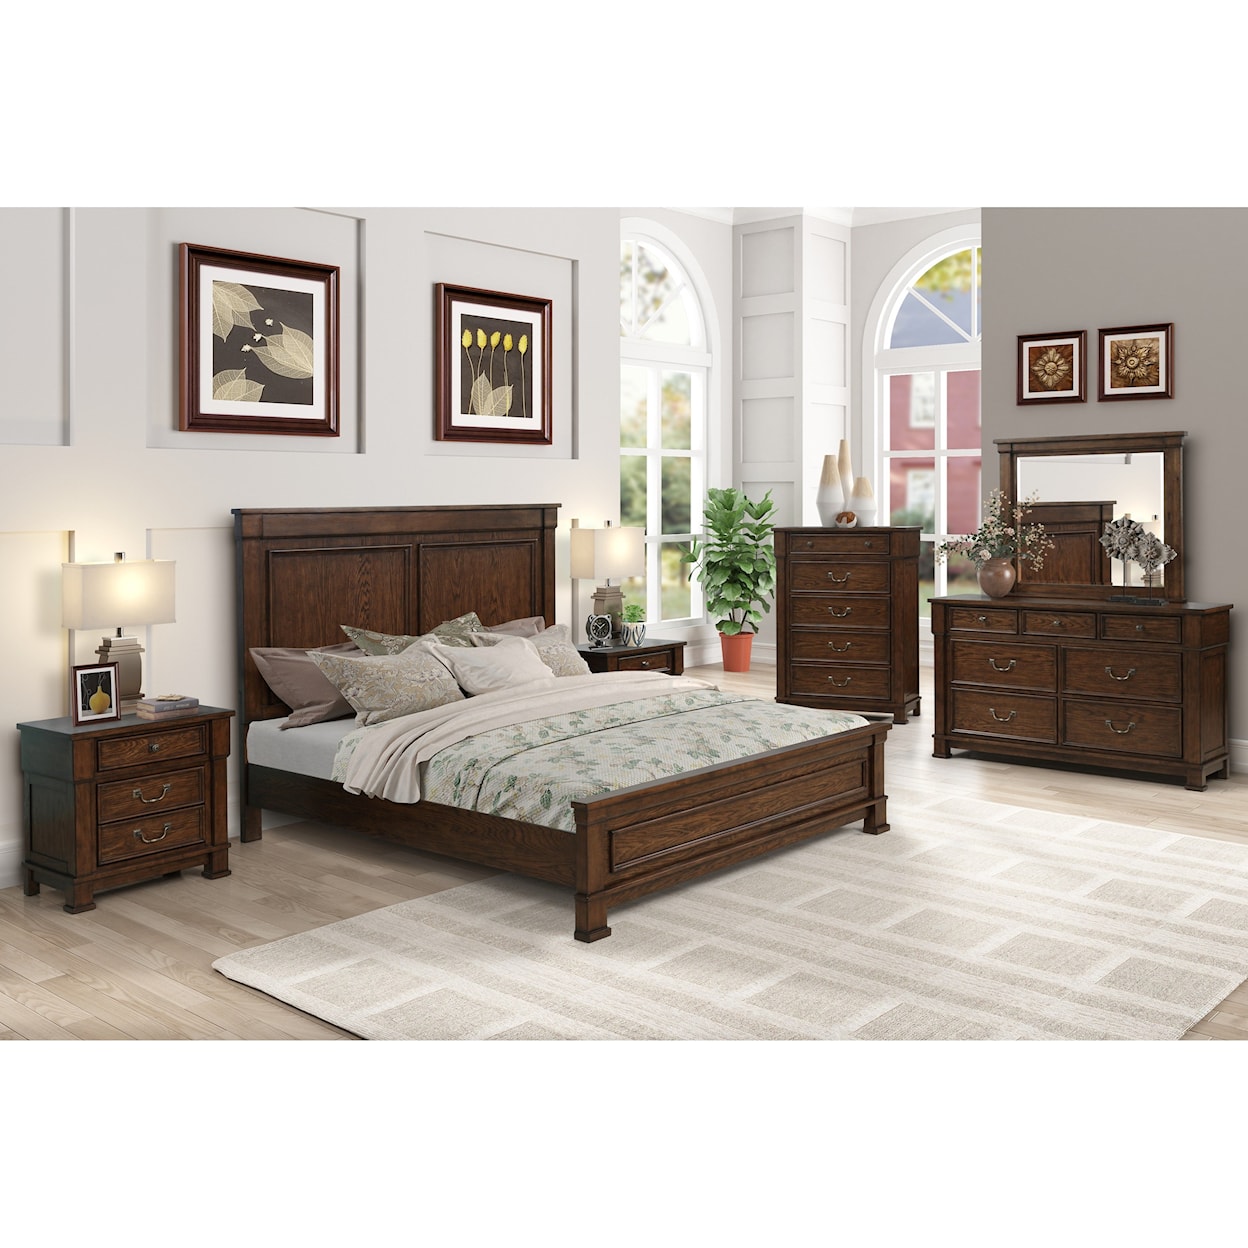 New Classic Furniture Providence Queen Bedroom Group 